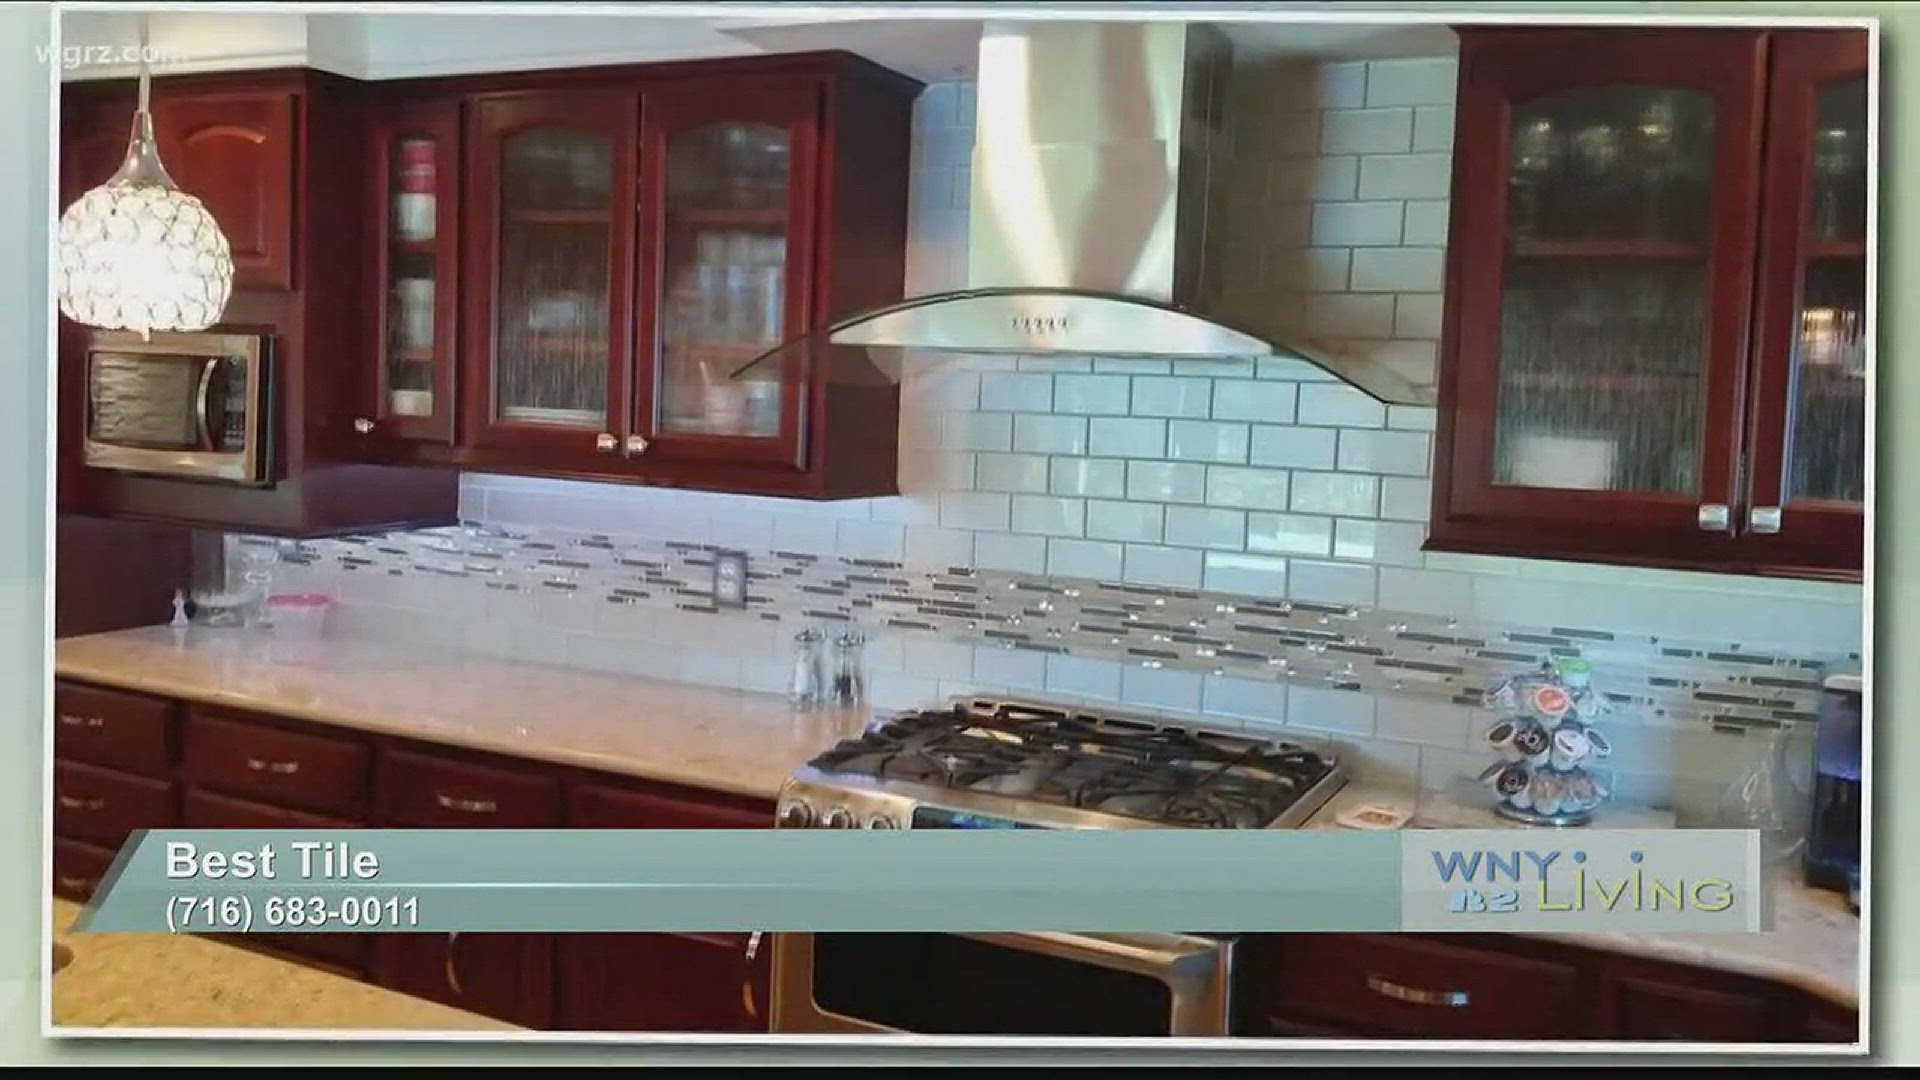 WNY Living - March 5th - Best Tile